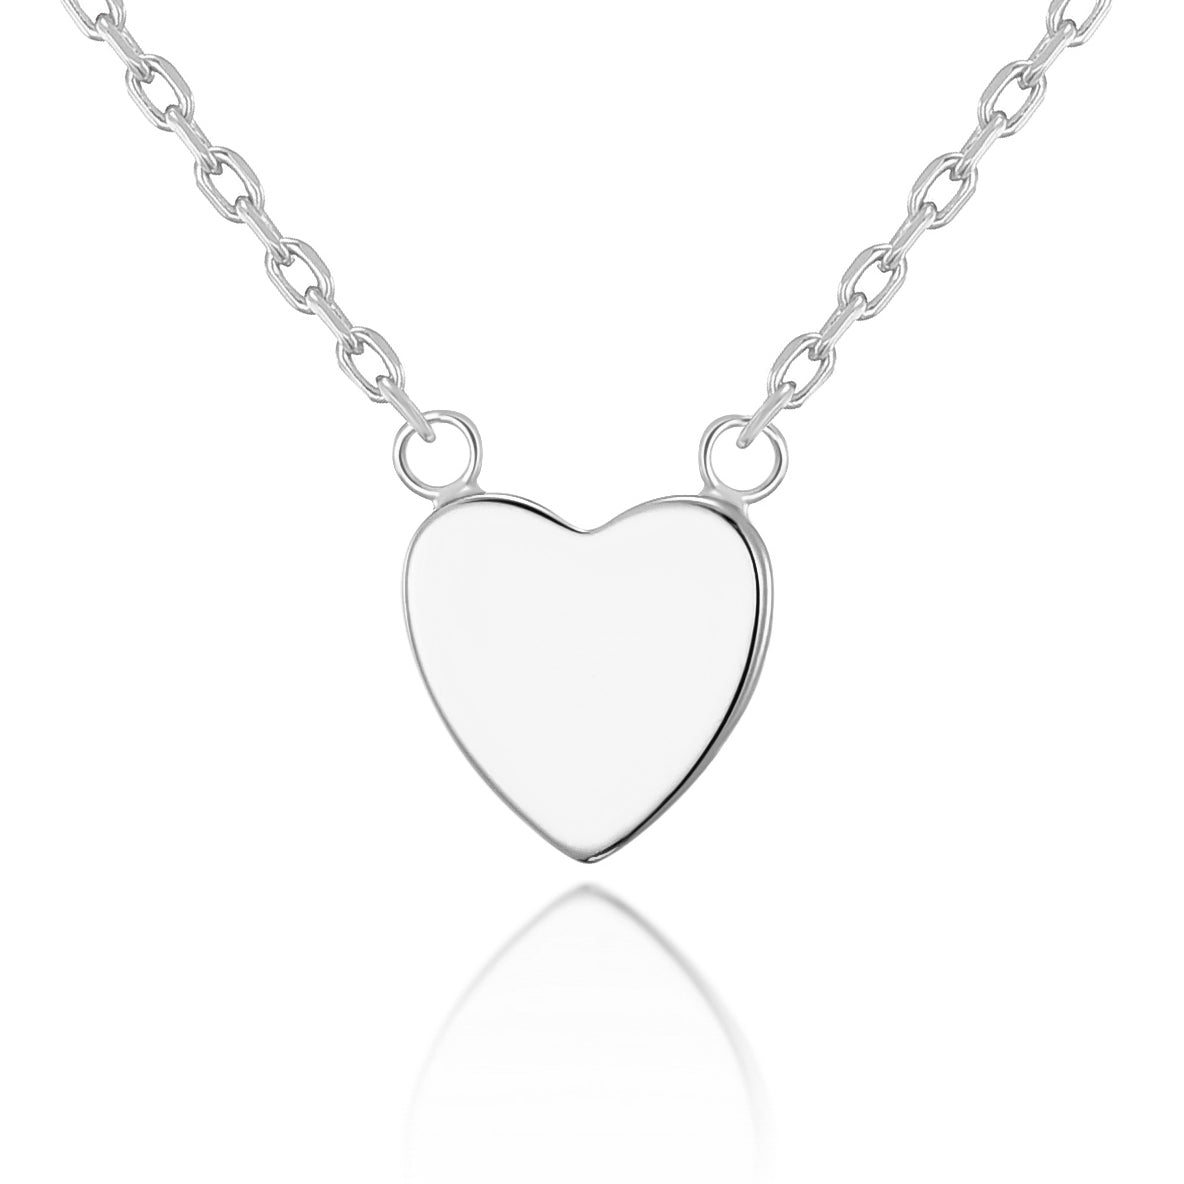 Silver Plated Heart Necklace by Philip Jones Jewellery